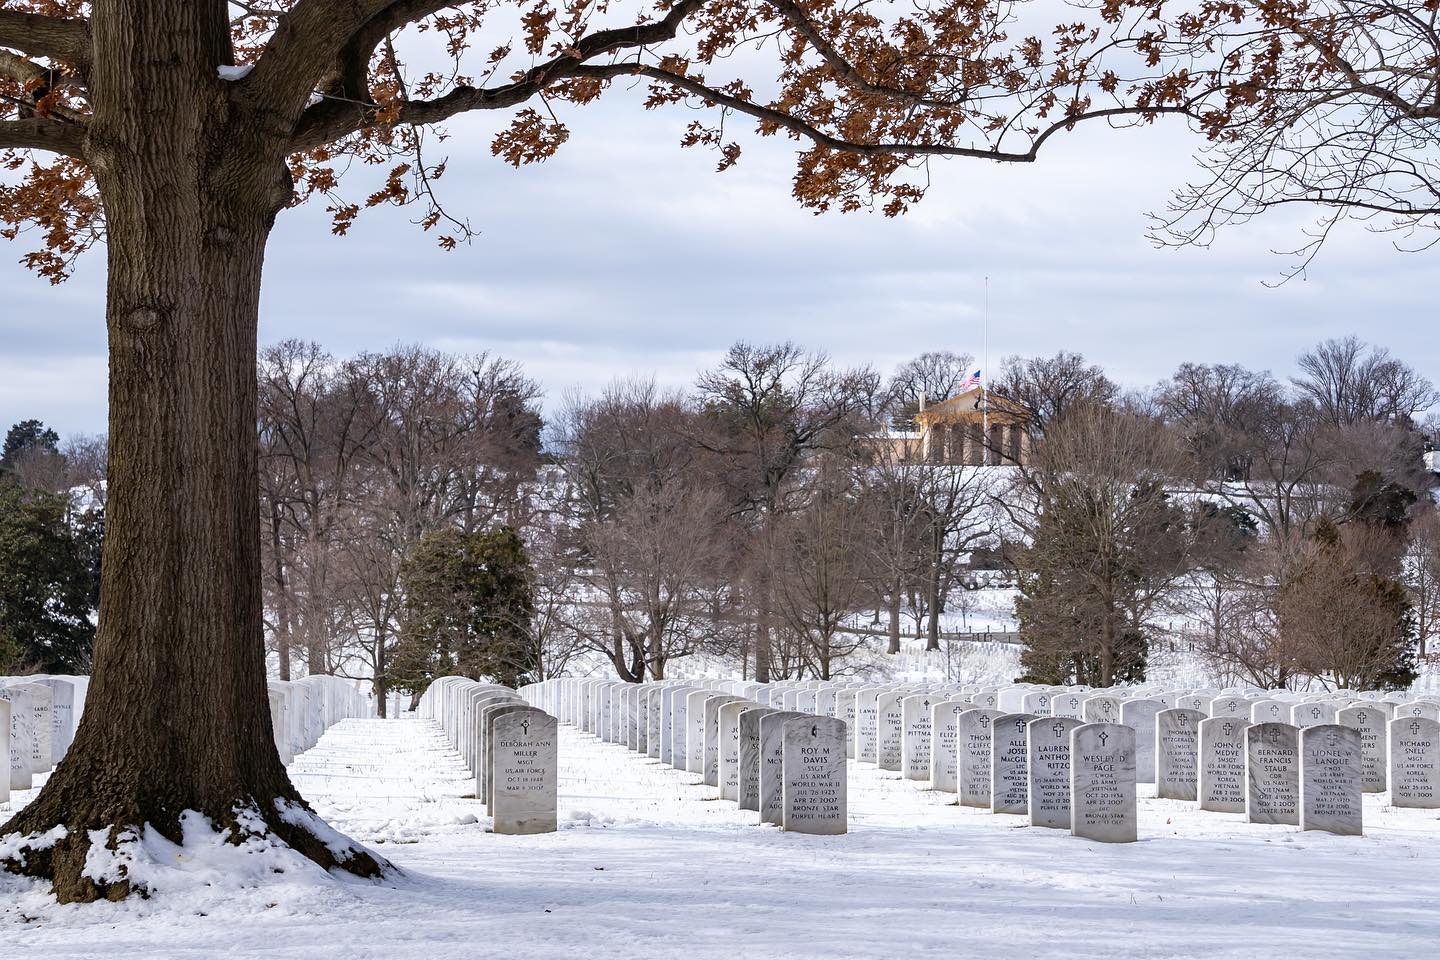 Seen towering above the graves in Section 54, dusted with a fresh coating of snow is the Arlington House. 

Before Arlington National Cemetery ever existed, it was Lee’s Arlington estate. But after Lee resigned from the U.S. Army to lead the Confederate forces, the property was occupied by the Army and later purchased by the U.S government in 1864. As Washington area hospitals overflowed with Civil War casualties, the estate was designated a national cemetery.

After the war, several Union leaders were concerned that Lee would try to reclaim his property and remove the graves and tombs. One of these people, Quartermaster General Montgomery Meigs, decided that the best way to ensure the cemetery’s permanence was to bury soldiers as close to the main house as possible. He got his way in August of 1864, when 26 fallen soldiers were buried by the perimeter of Lee’s rose garden.

This might seem like an extreme measure, but there is proof that the Lees had an interest in returning to their estate and dislocating soldiers’ graves in the process. Robert E. Lee’s brother, Smith Lee, is recorded to have said “the house could still be made a pleasant residence, by fencing off the Cemetery, and removing the officers buried around the garden.”

However, the plan to move the graves even closer seemed to have worked. Robert E. Lee never returned to his Arlington estate. No one knows if it was because his front lawn became a graveyard or because he had just had enough with the Washington area, but Lee moved to Lexington, Virginia and died five years later. He is buried at Lee Chapel in Lexington, and not in Arlington Cemetery where he once lived.